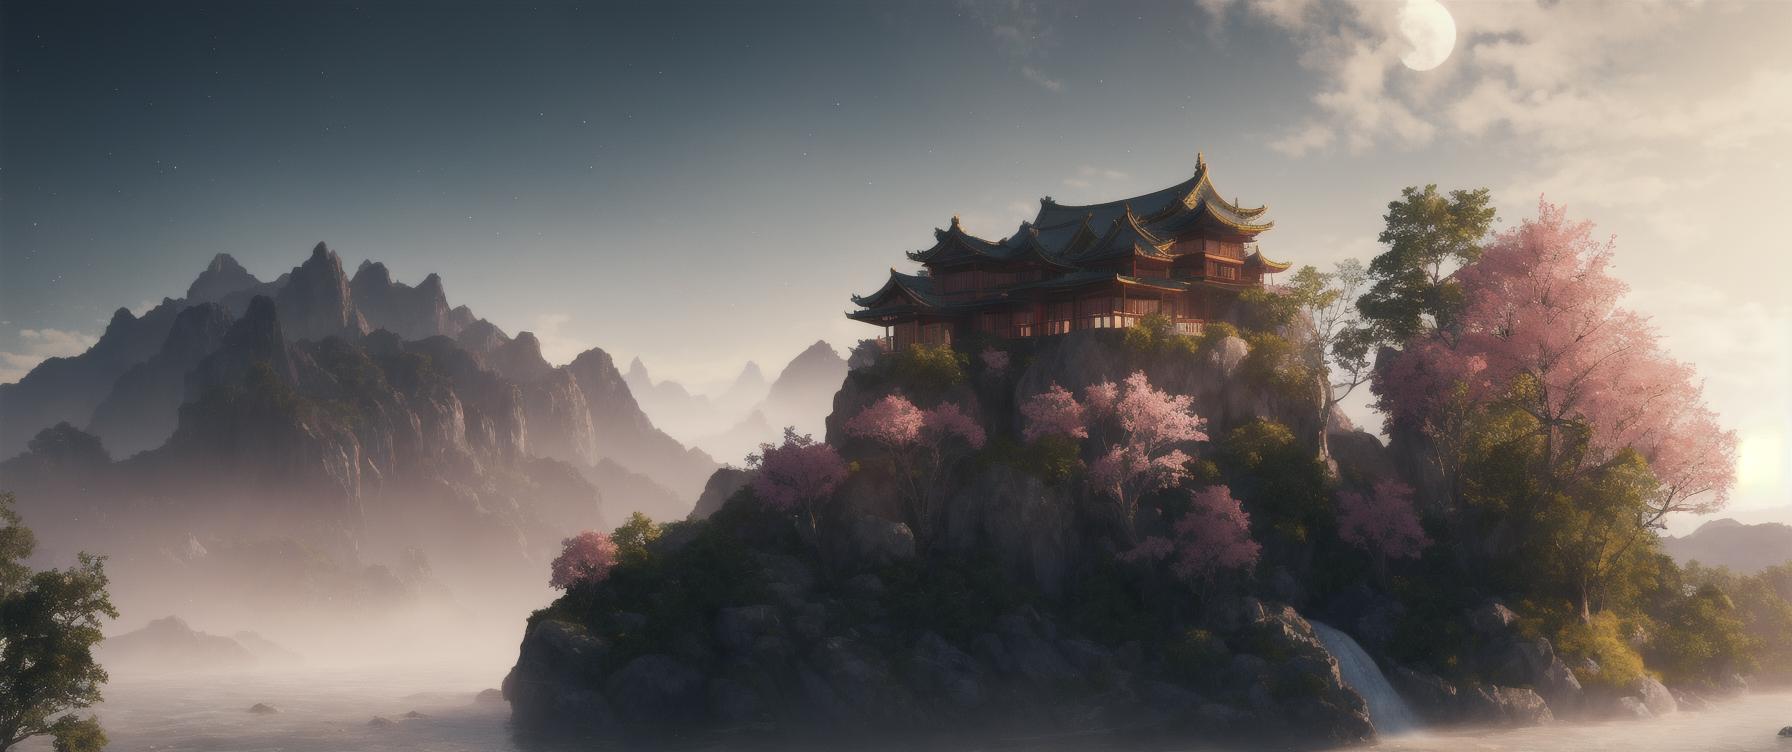 A majestic Chinese palace with a mountainous backdrop and pink cherry blossoms.